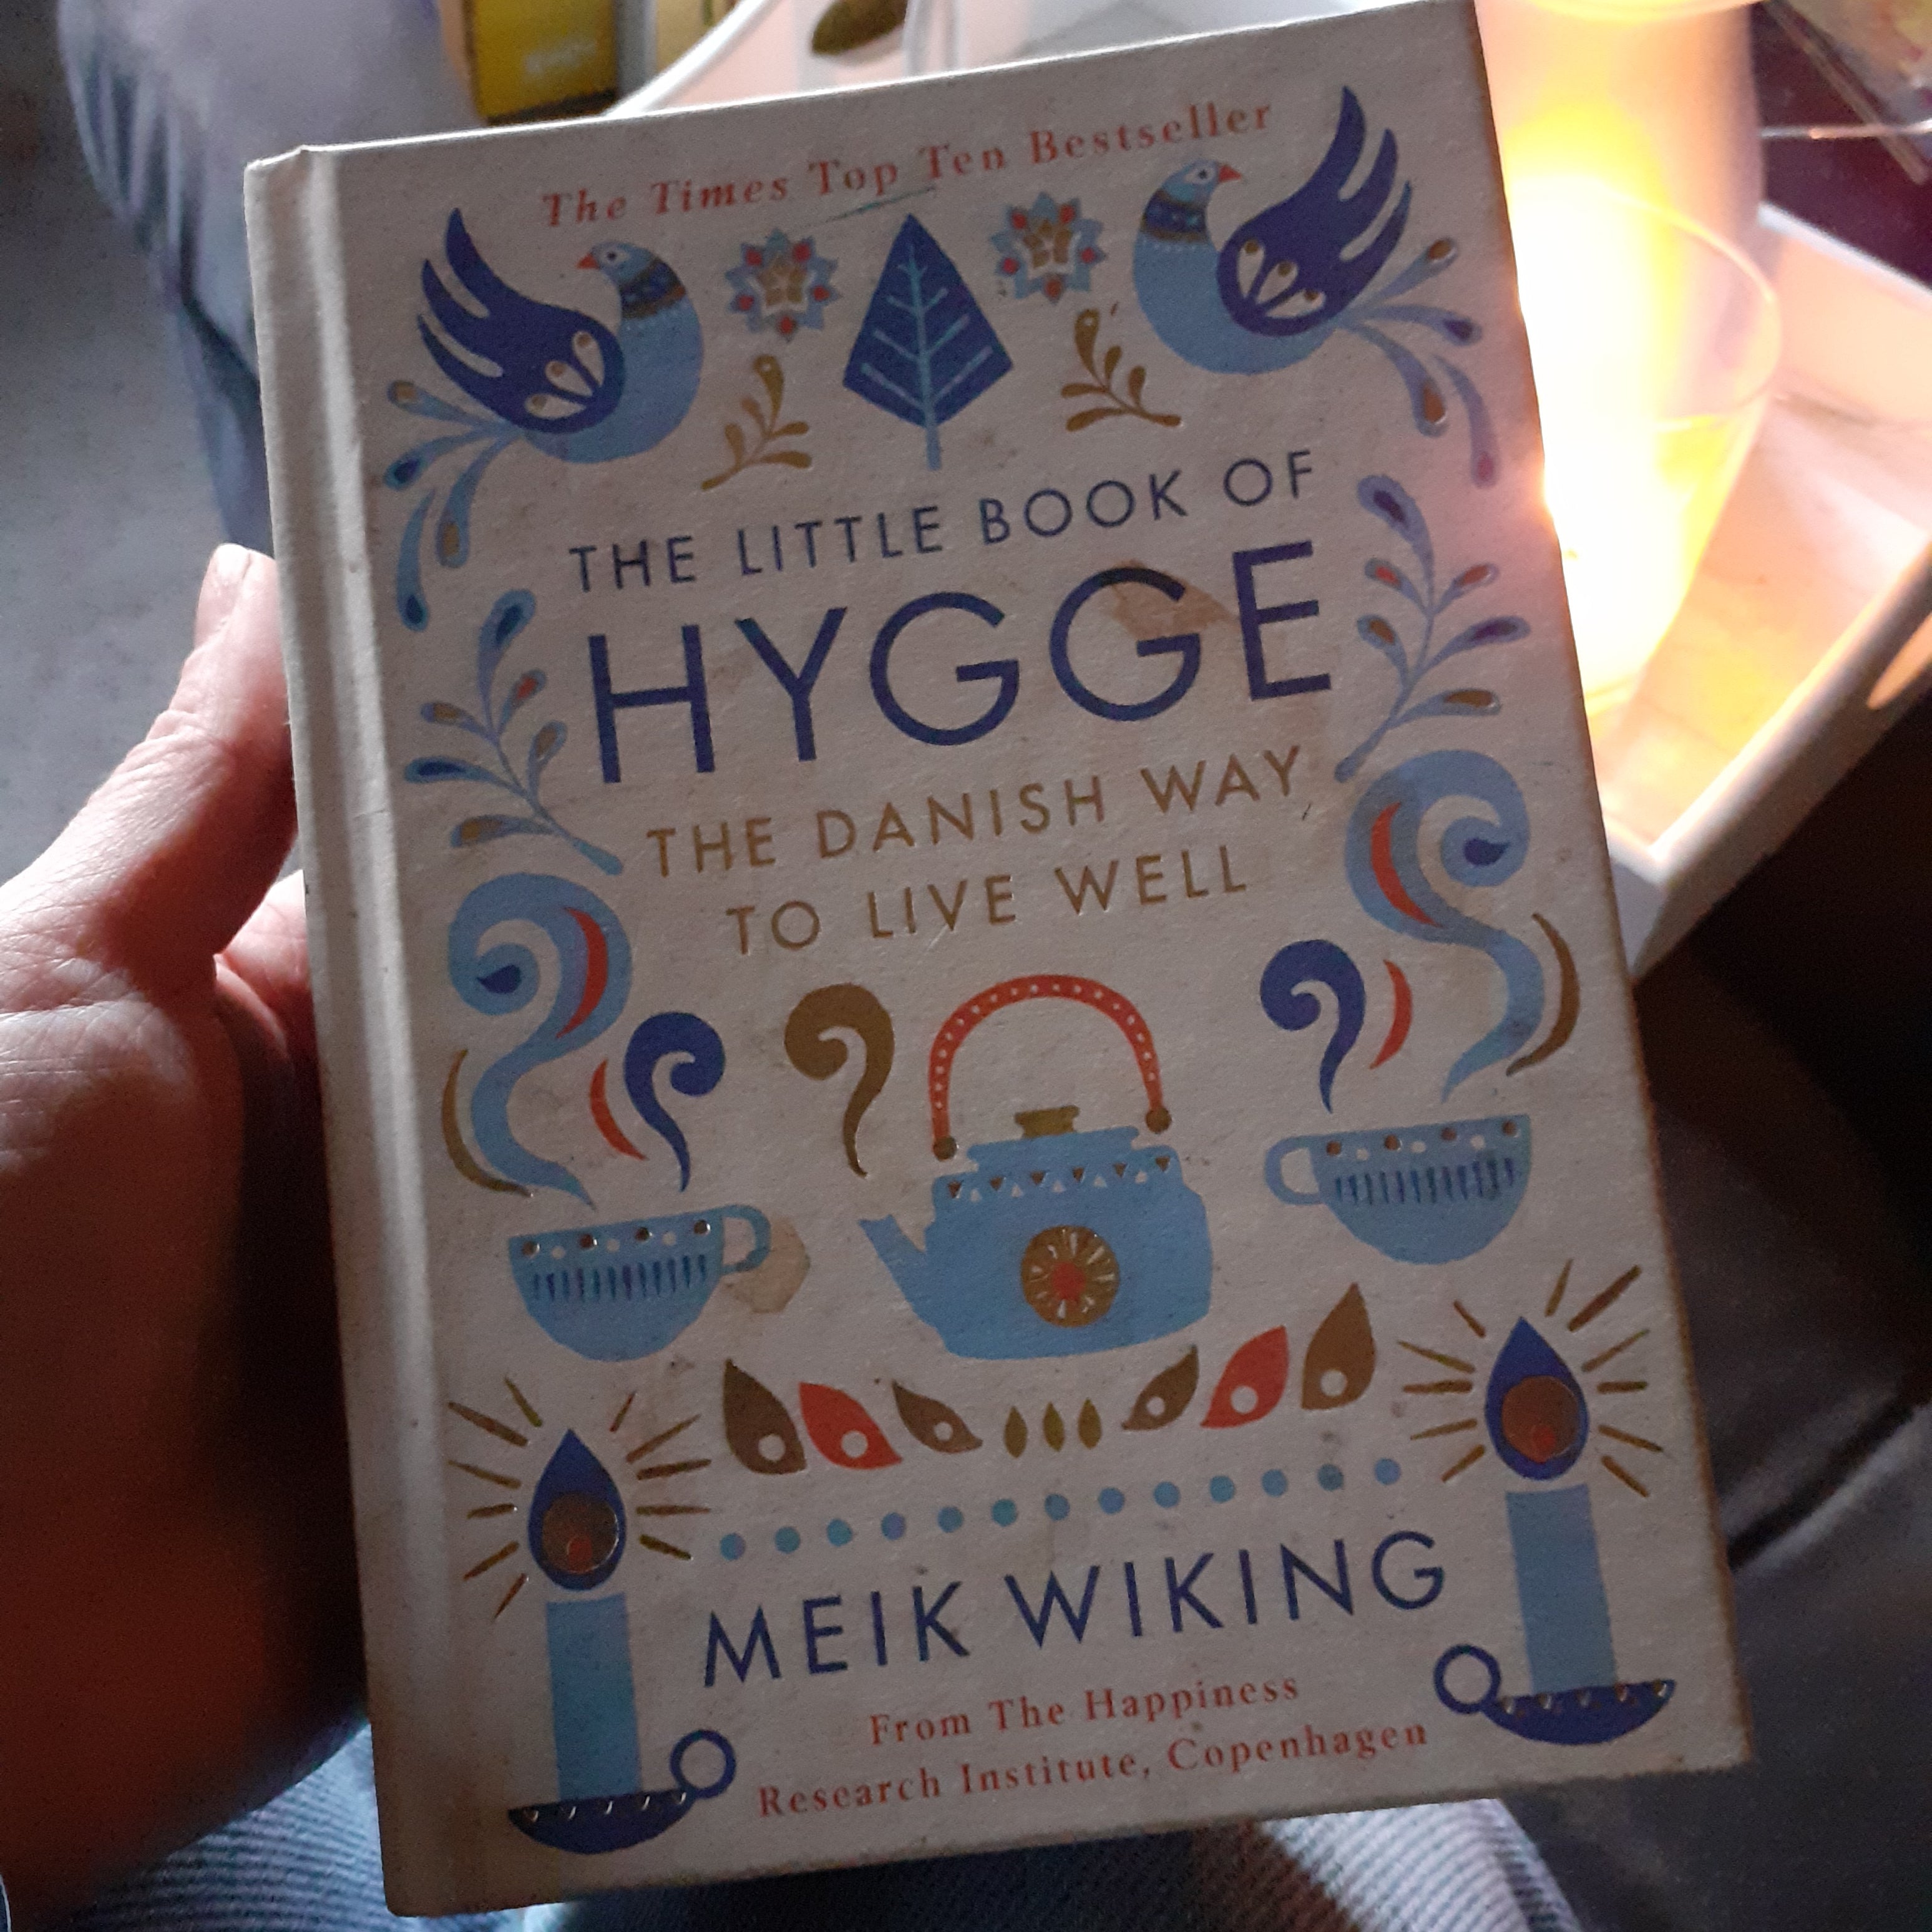 The Little Book of Hygge: The Danish Way to Live Well by Meik Wiking